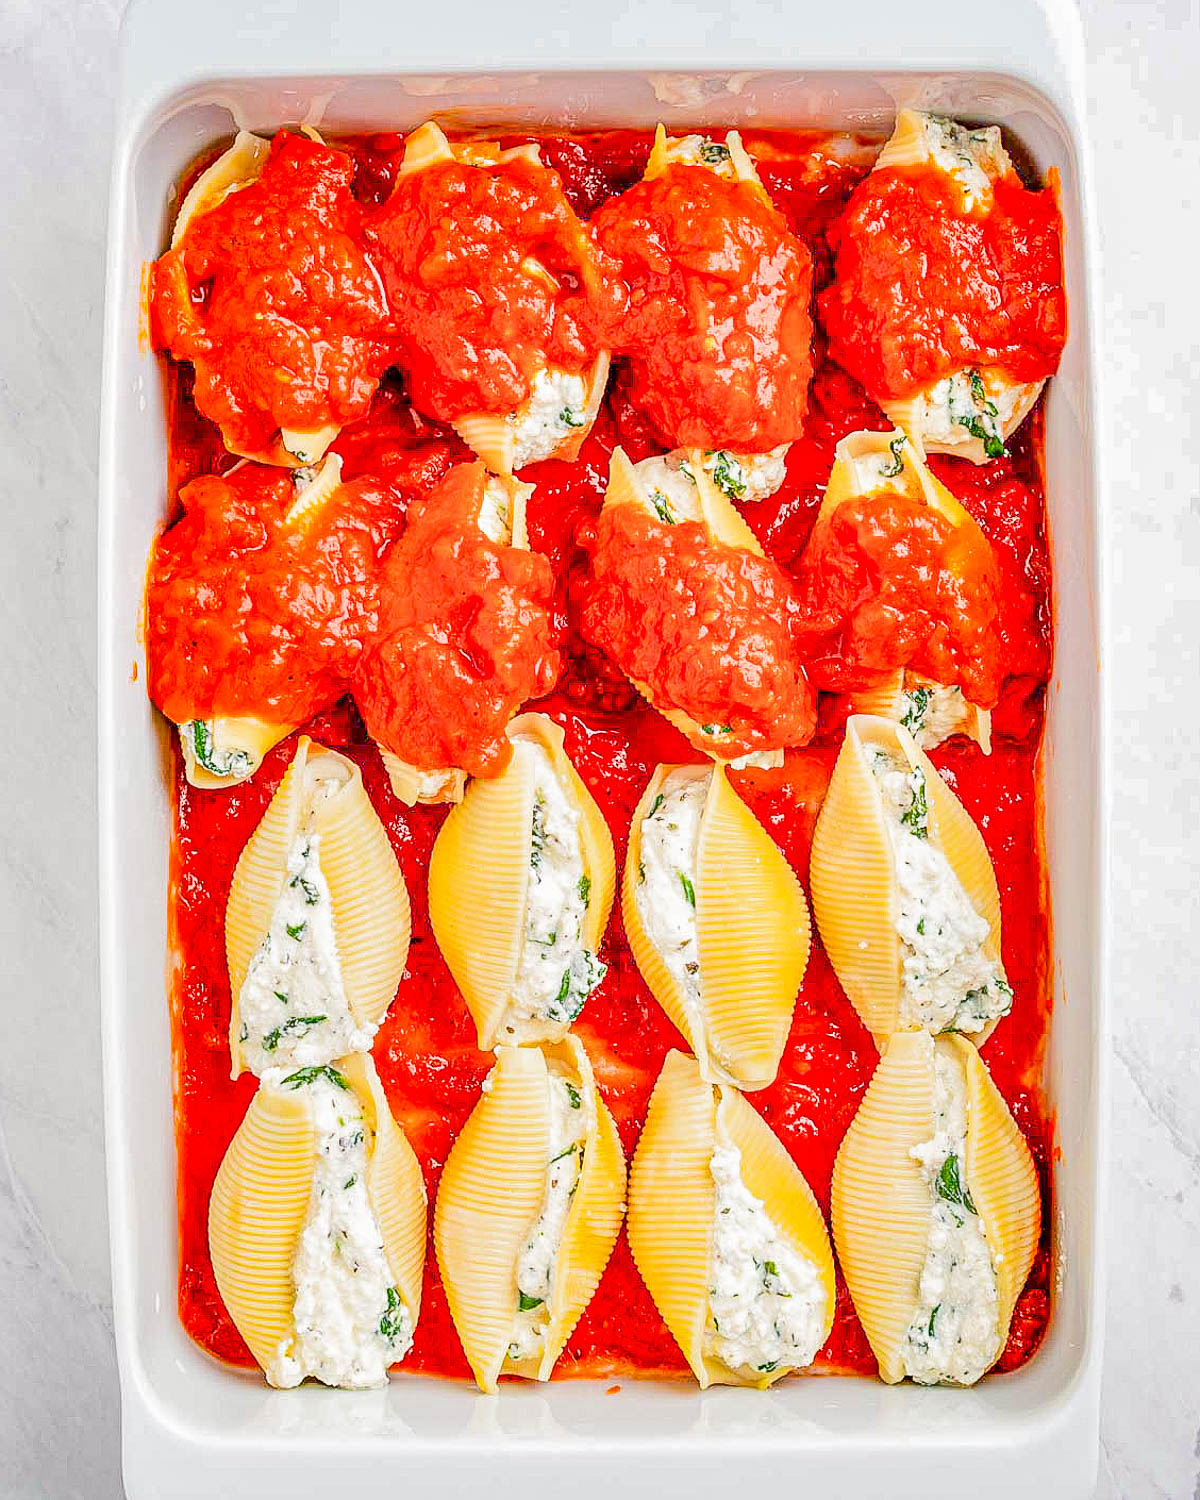 Stuffed jumbo pasta shells with ricotta cheese in a baking dish, topped with tomato sauce.